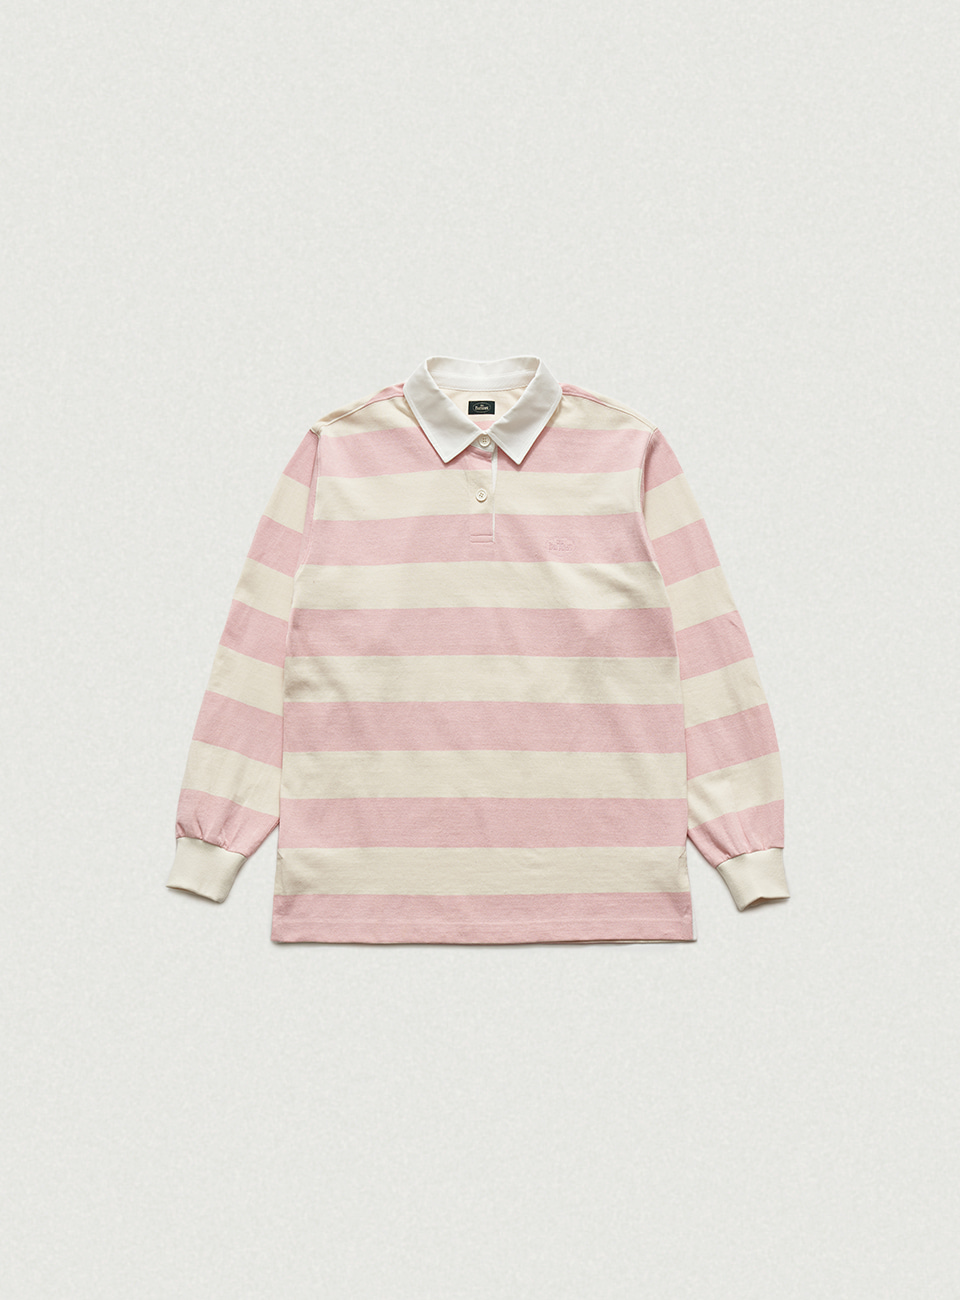 Women’s Pink Classic Striped Rugby Shirt